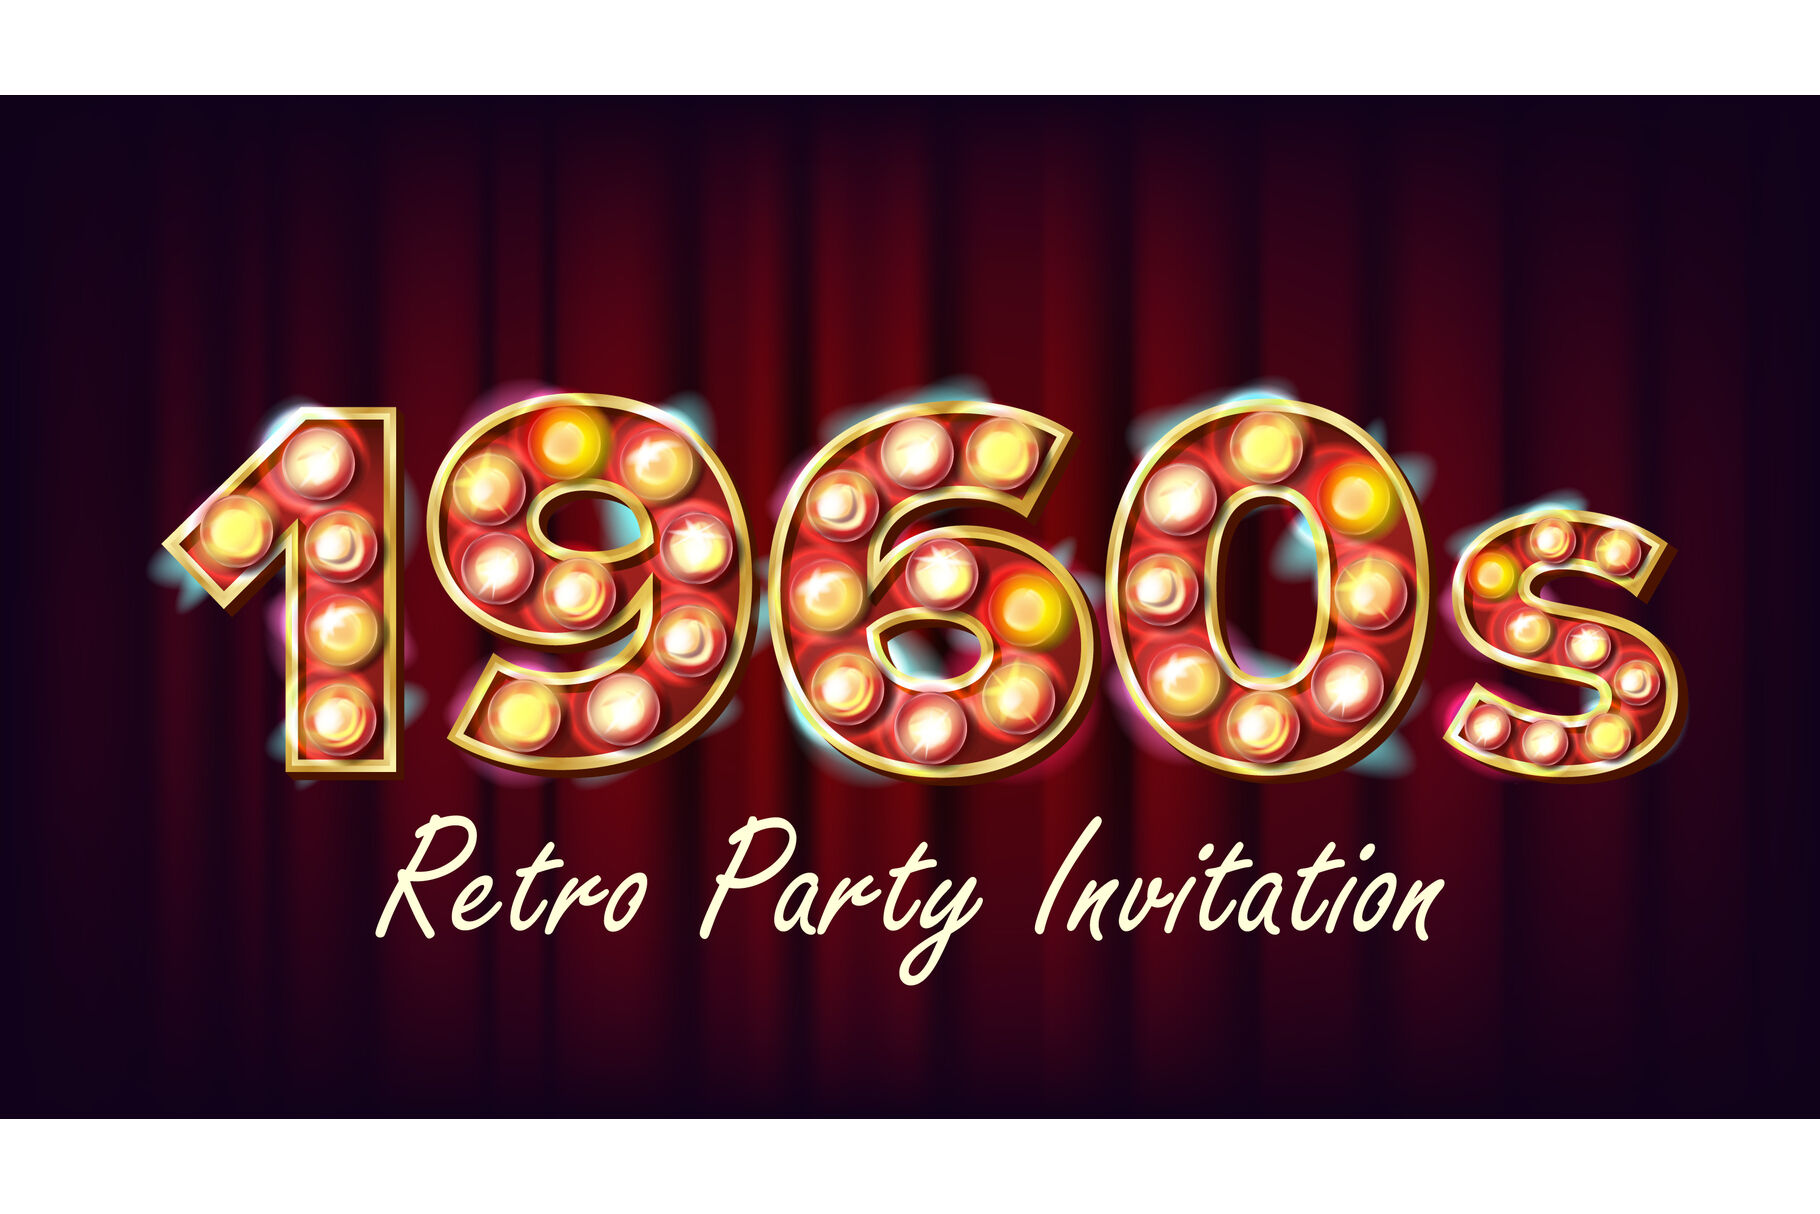 1960s Retro Party Invitation Vector 1960 Style Lamp Bulb 3d Electric Glowing Illuminated Retro Sign Poster Flyer Banner Template Night Club Disco Party Event Advertising Vintage Illustration By Pikepicture Thehungryjpeg Com